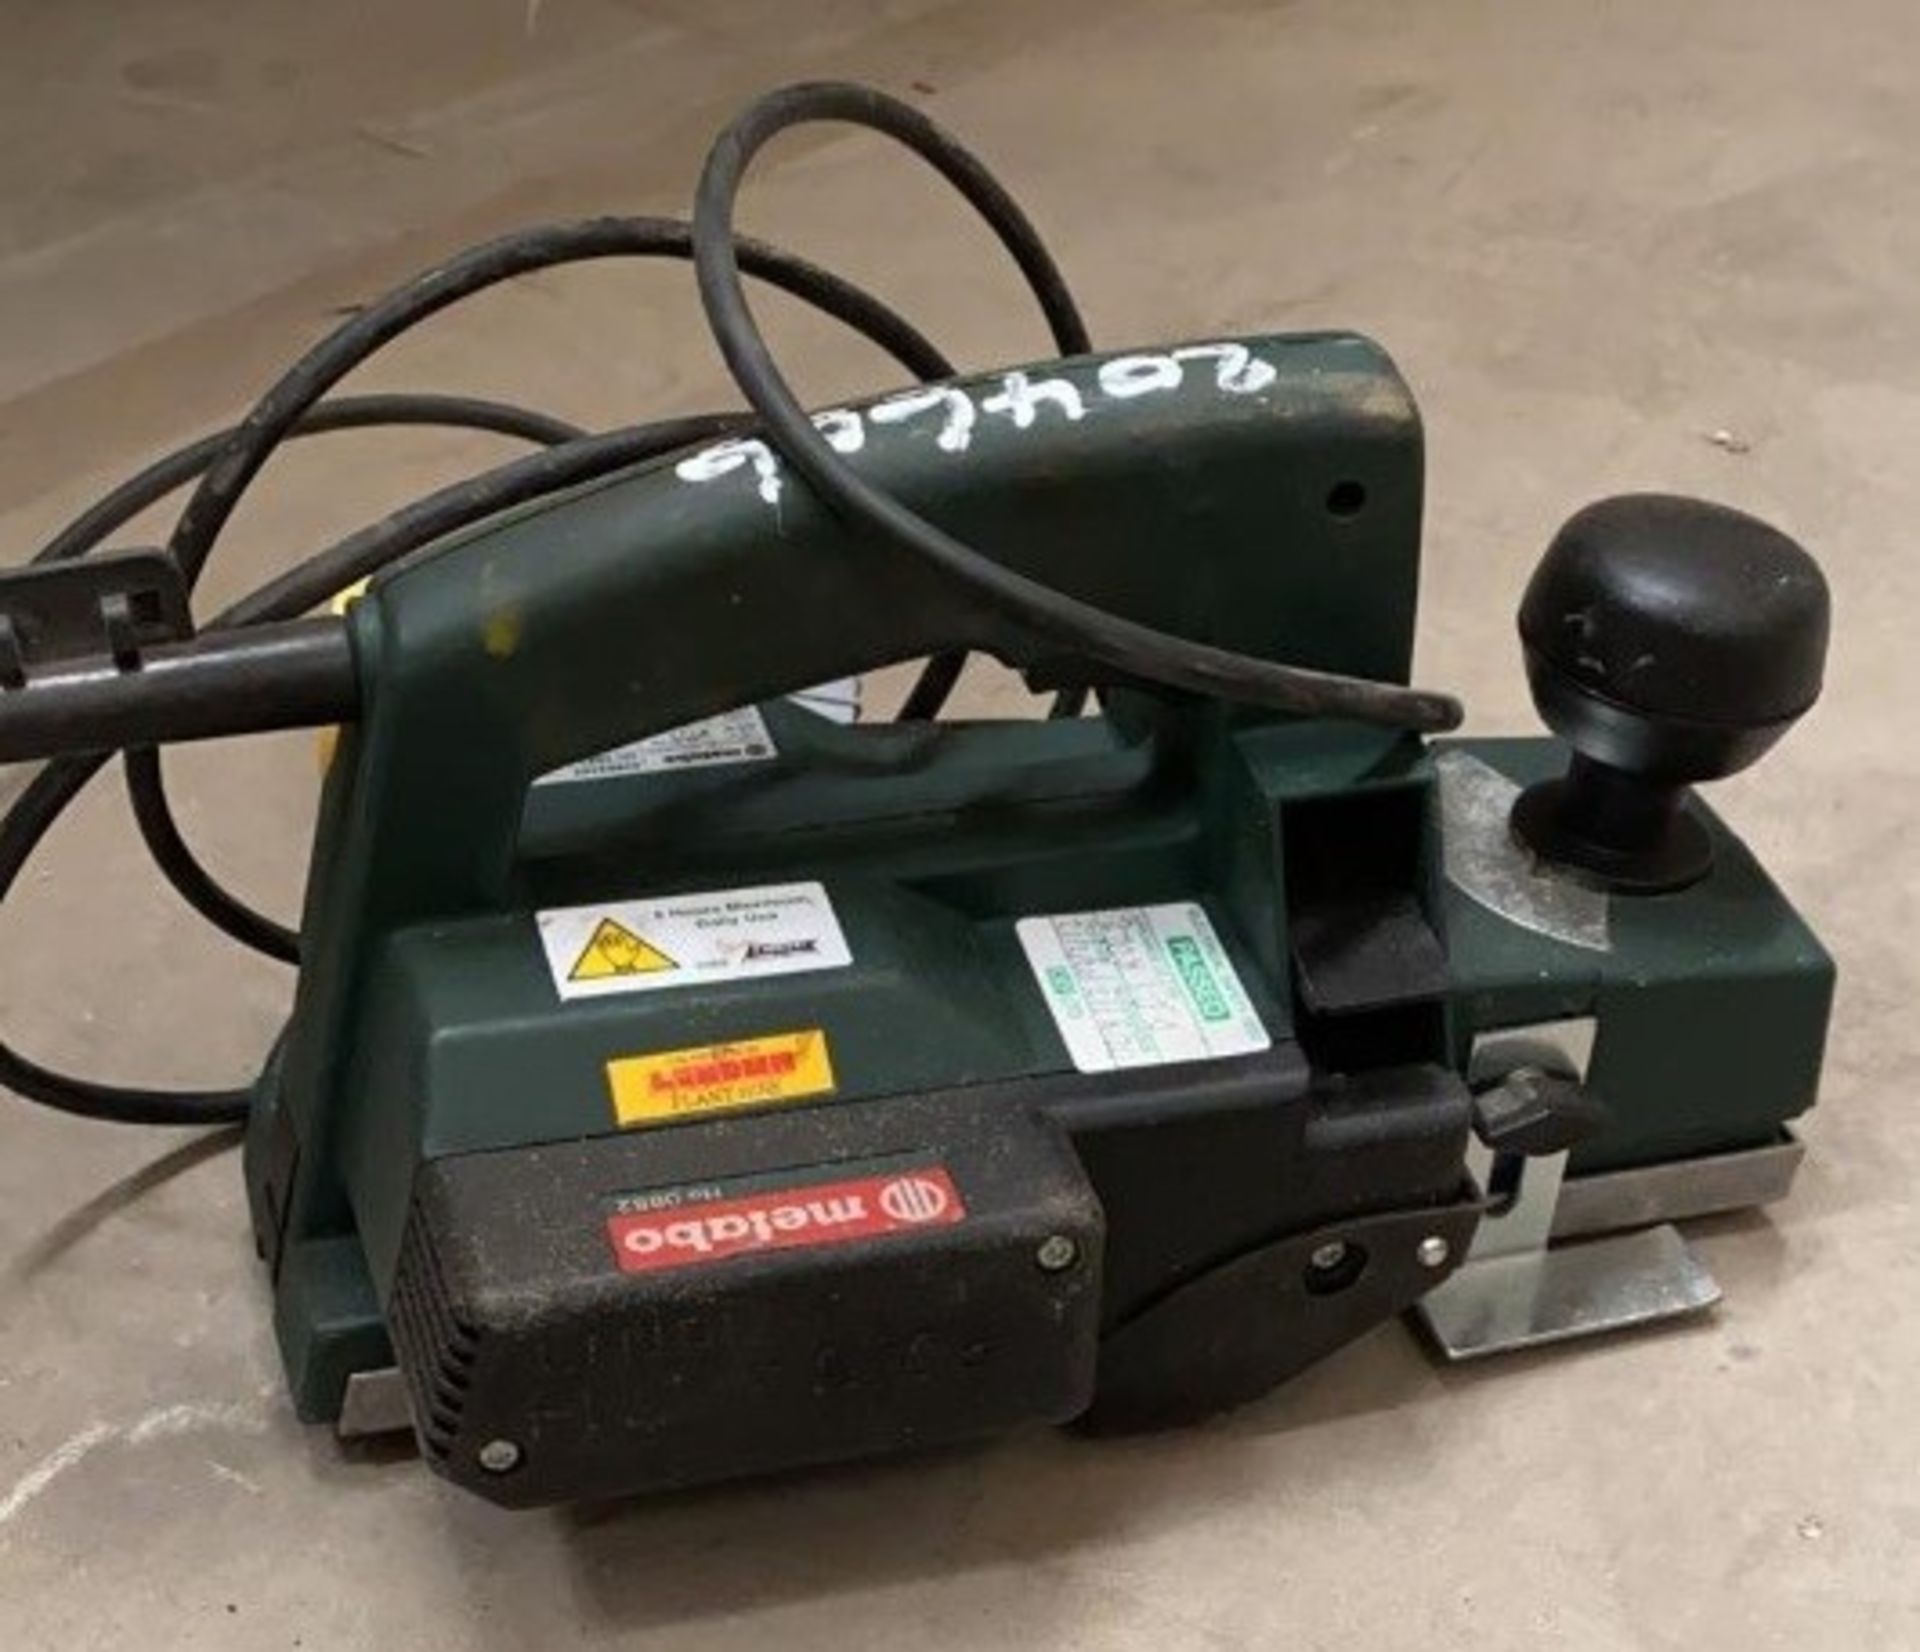 1 x Metabo 110V Planer - Used, Recently Removed From A Working Site - CL505 - Ref: TL018 - Location: